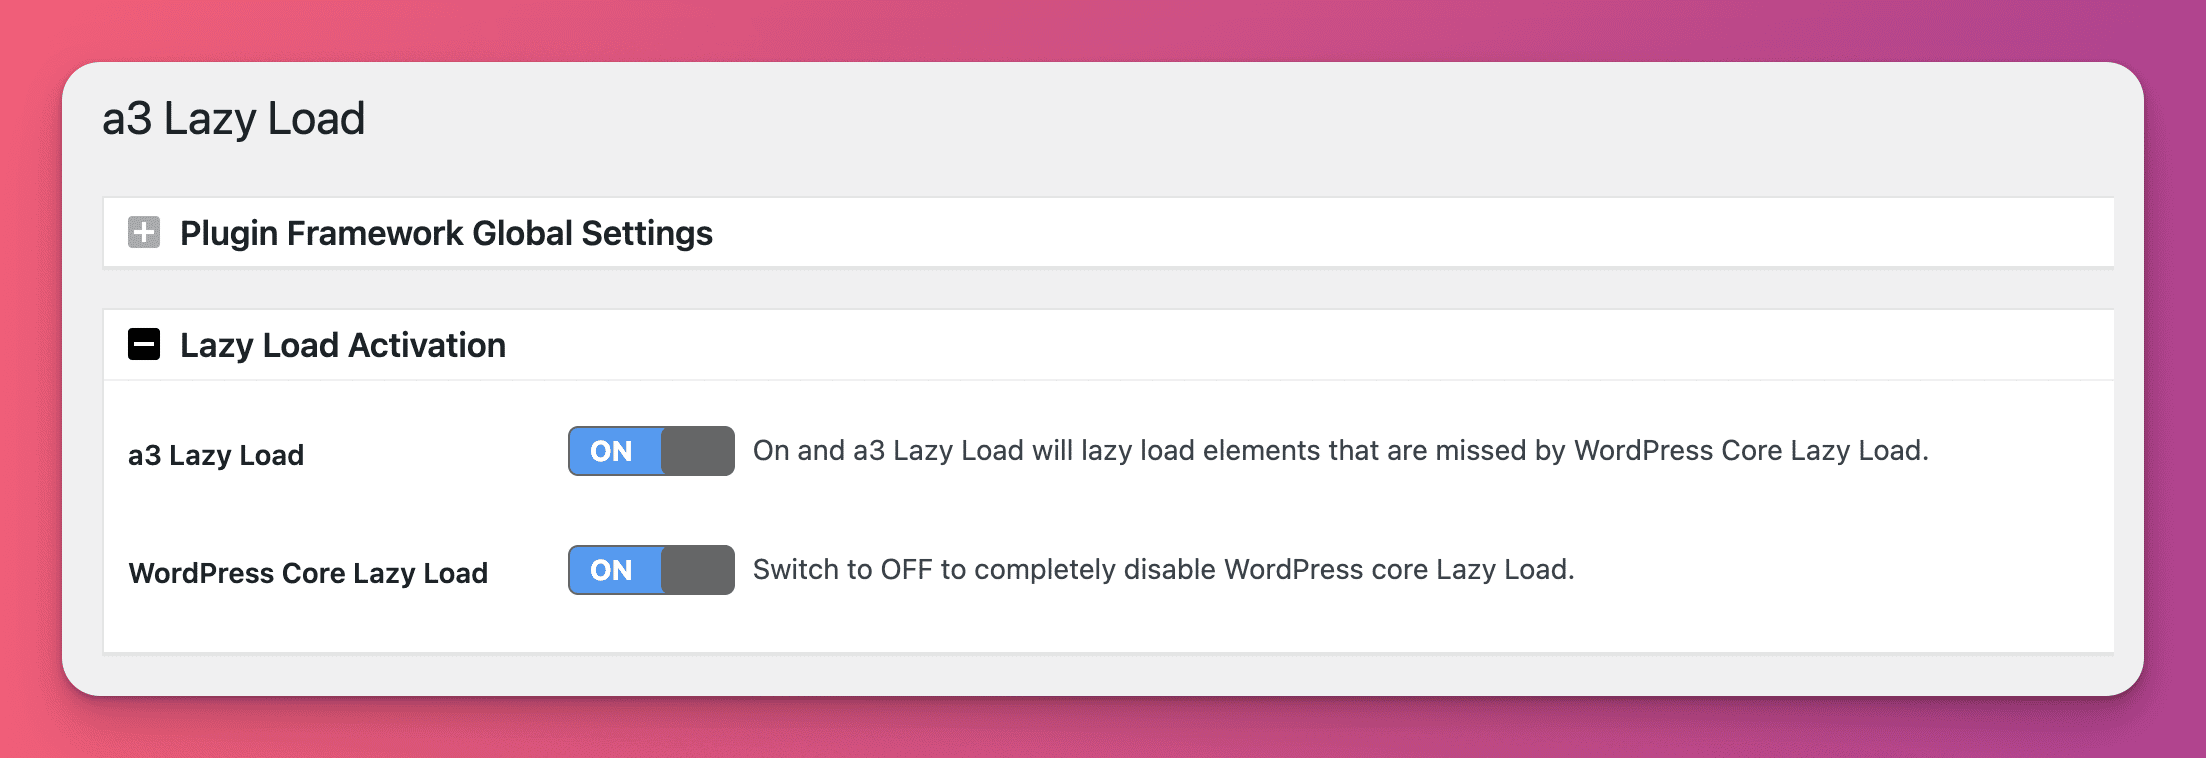 a3 Lazy Load activation settings for WordPress enabling the basic plugin functionalities